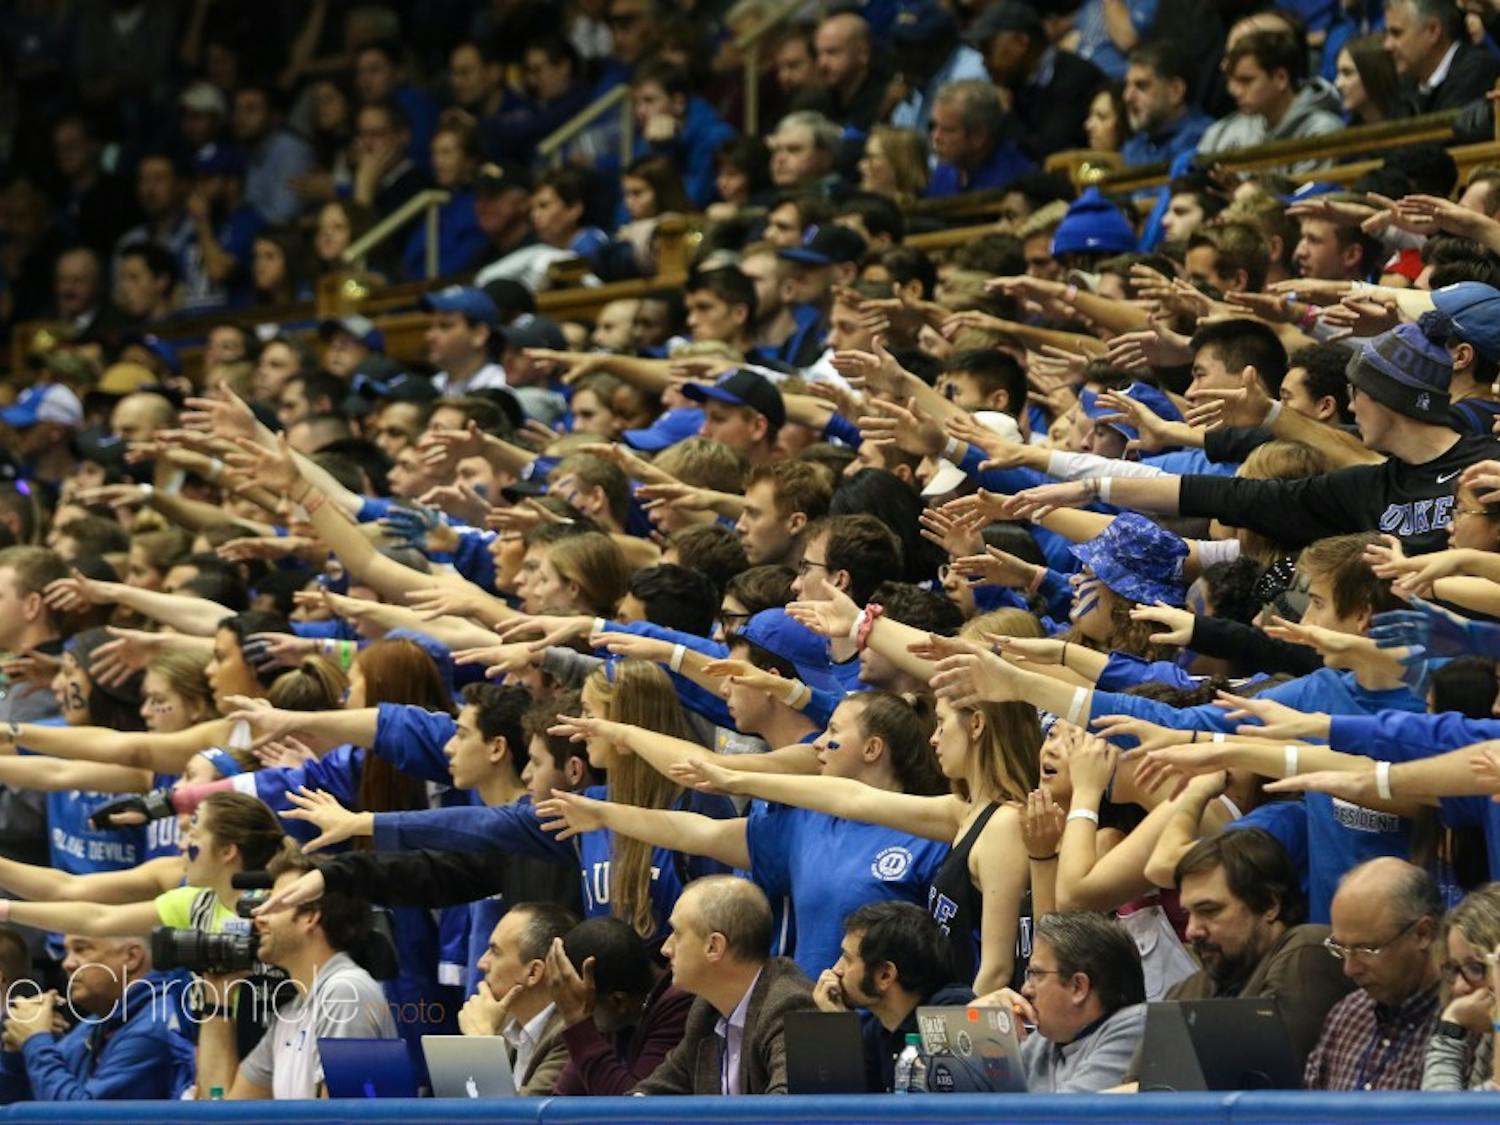 The Cameron Crazies should have a lot to cheer for next season.